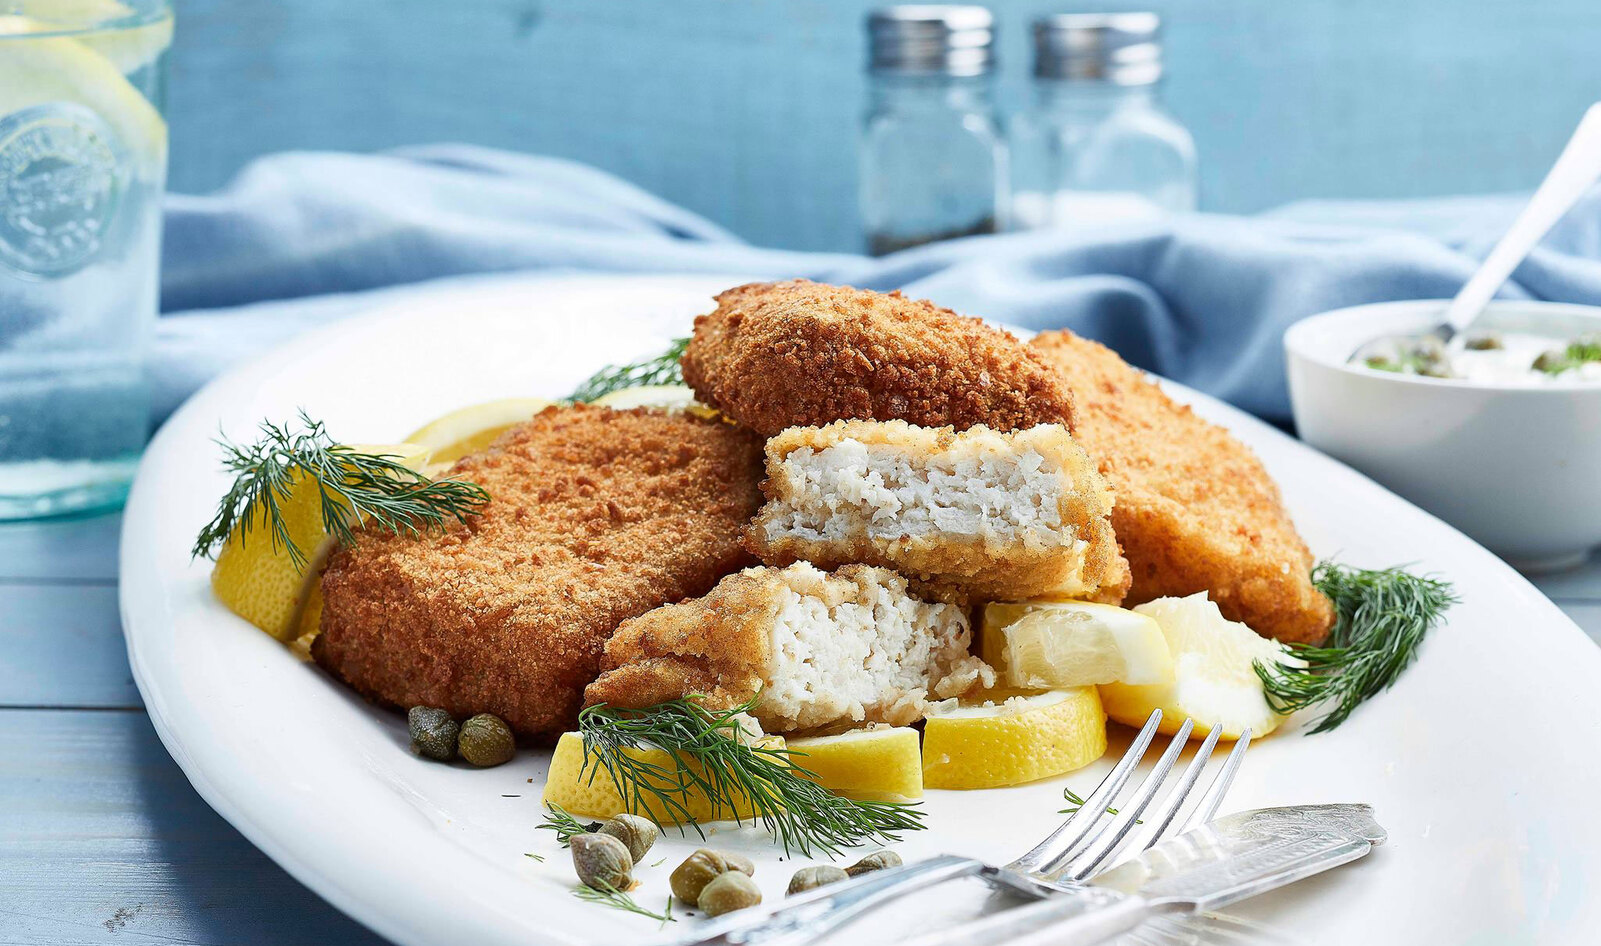 Vegan Fish to Be Recognized as “Sustainable Seafood”